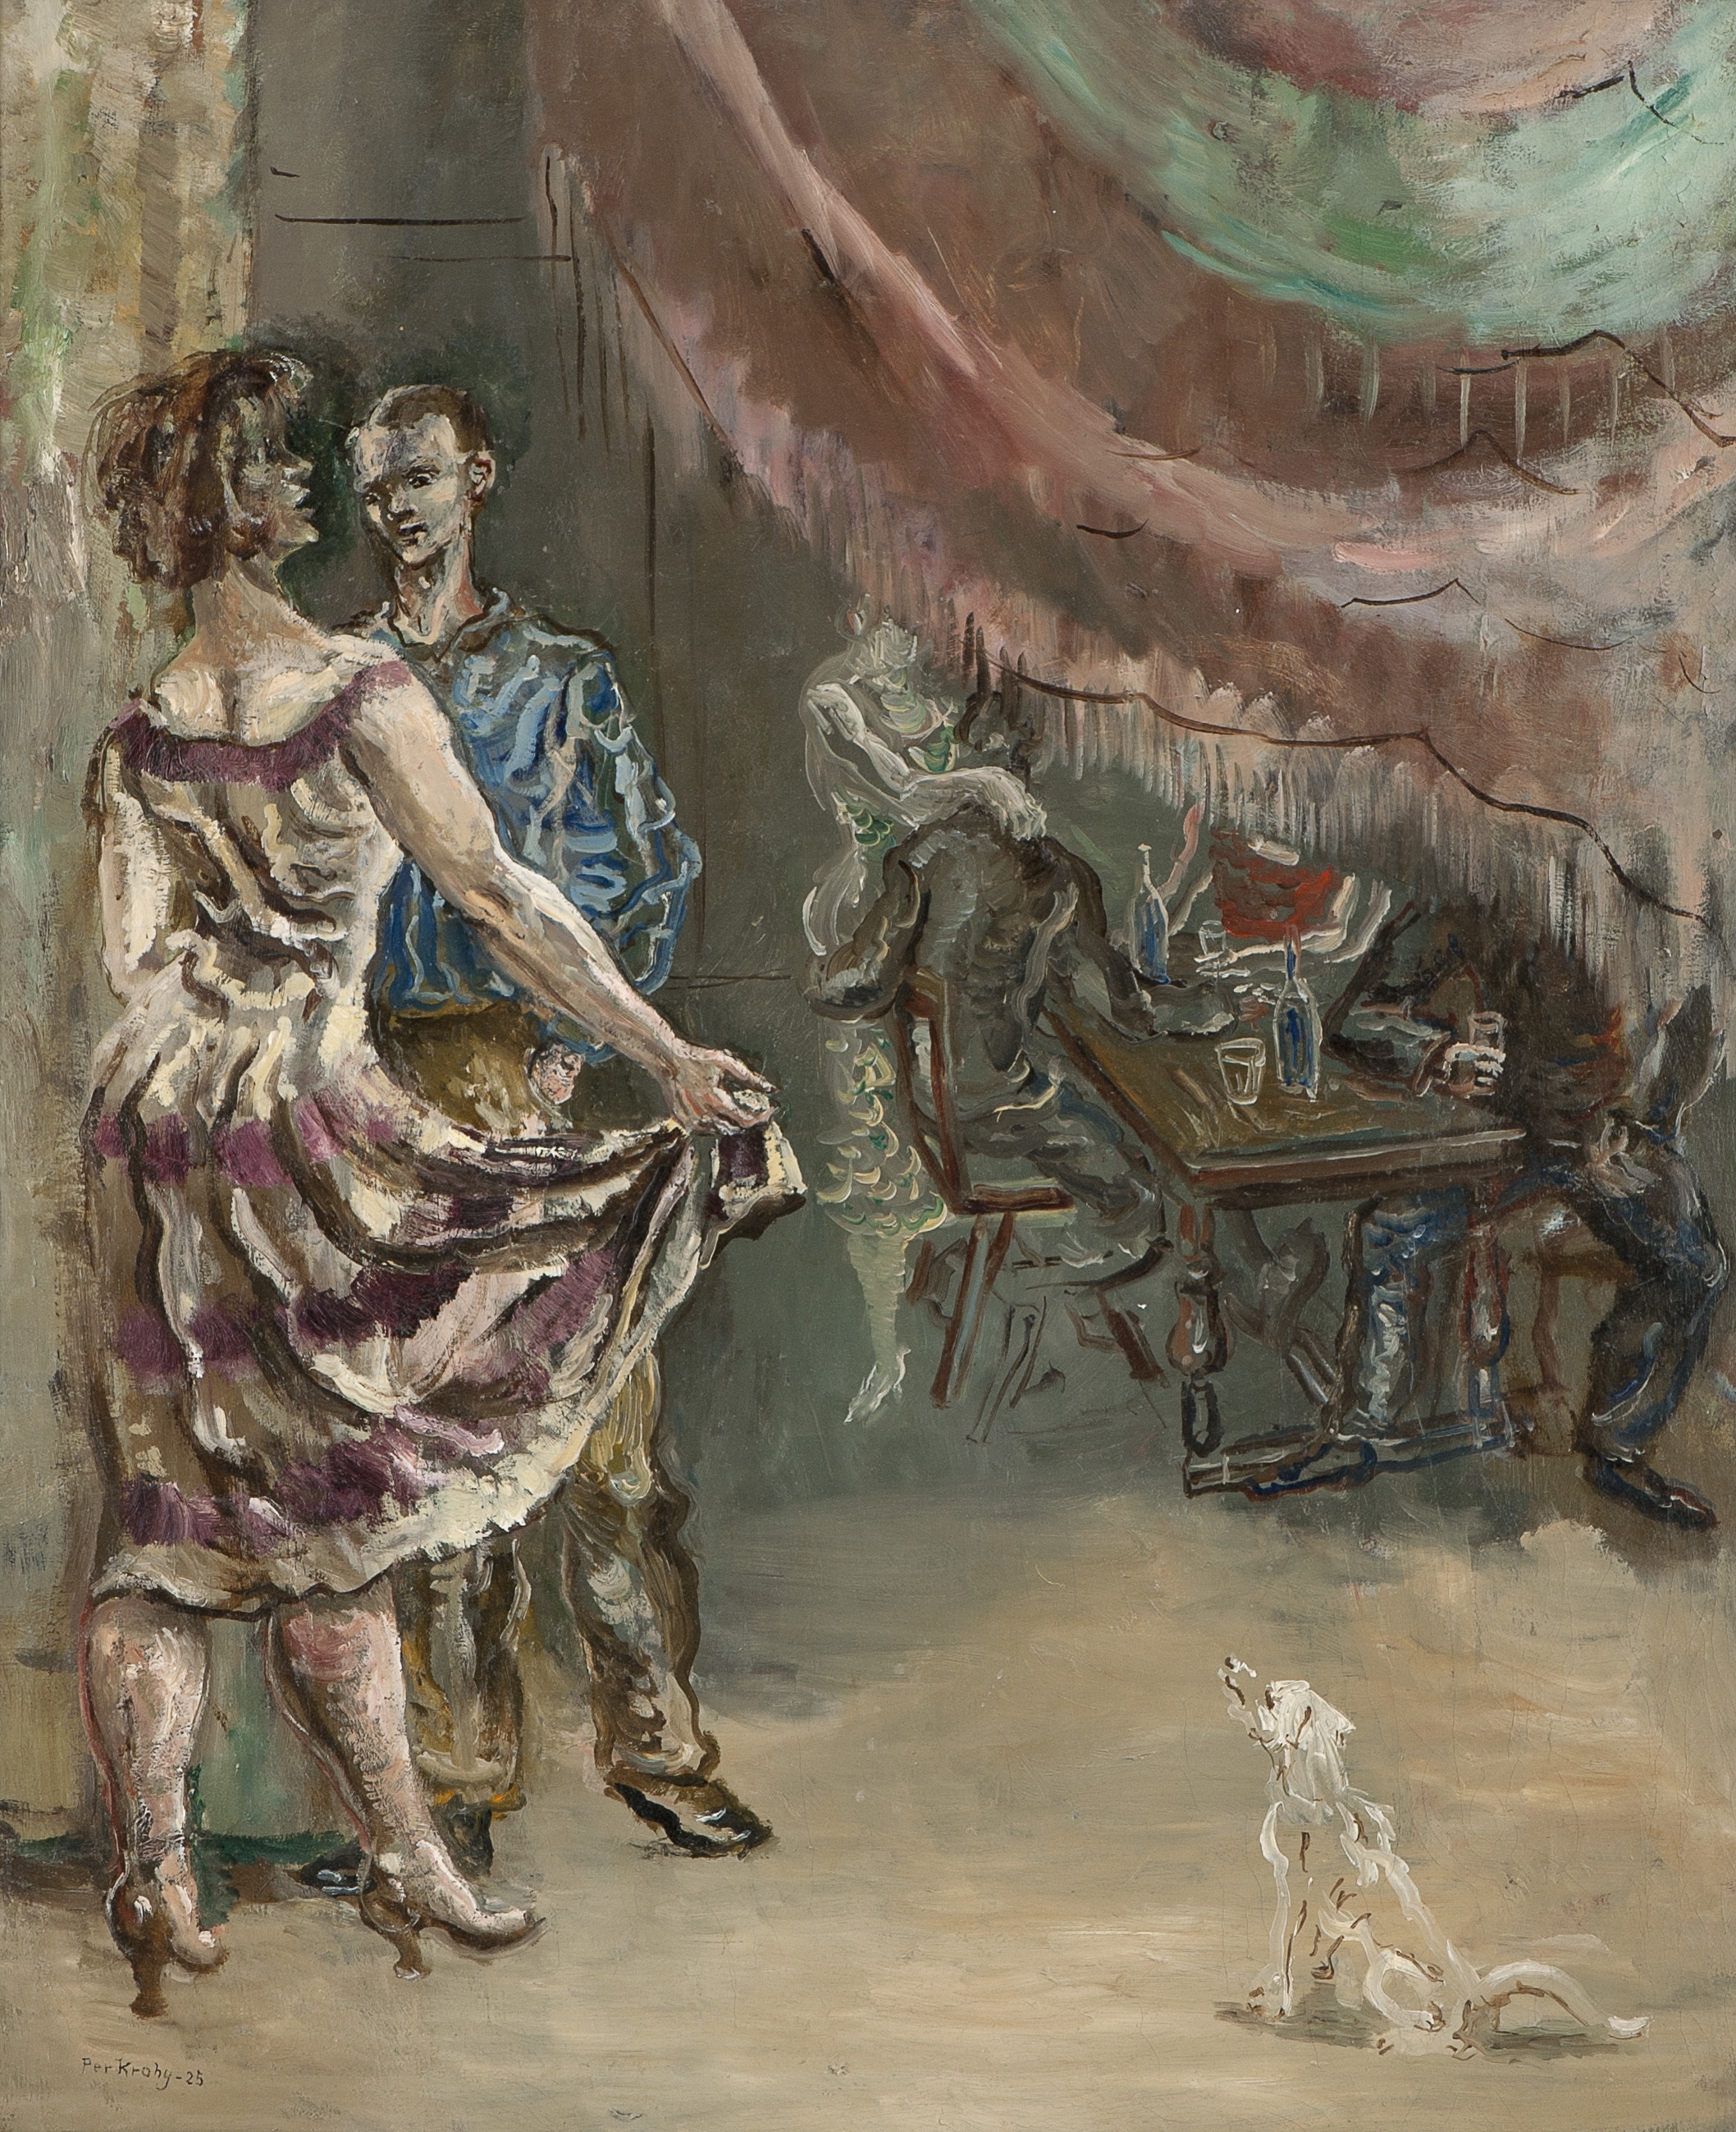 Artwork by Per Krohg, Peinture, Made of Oil on canvas